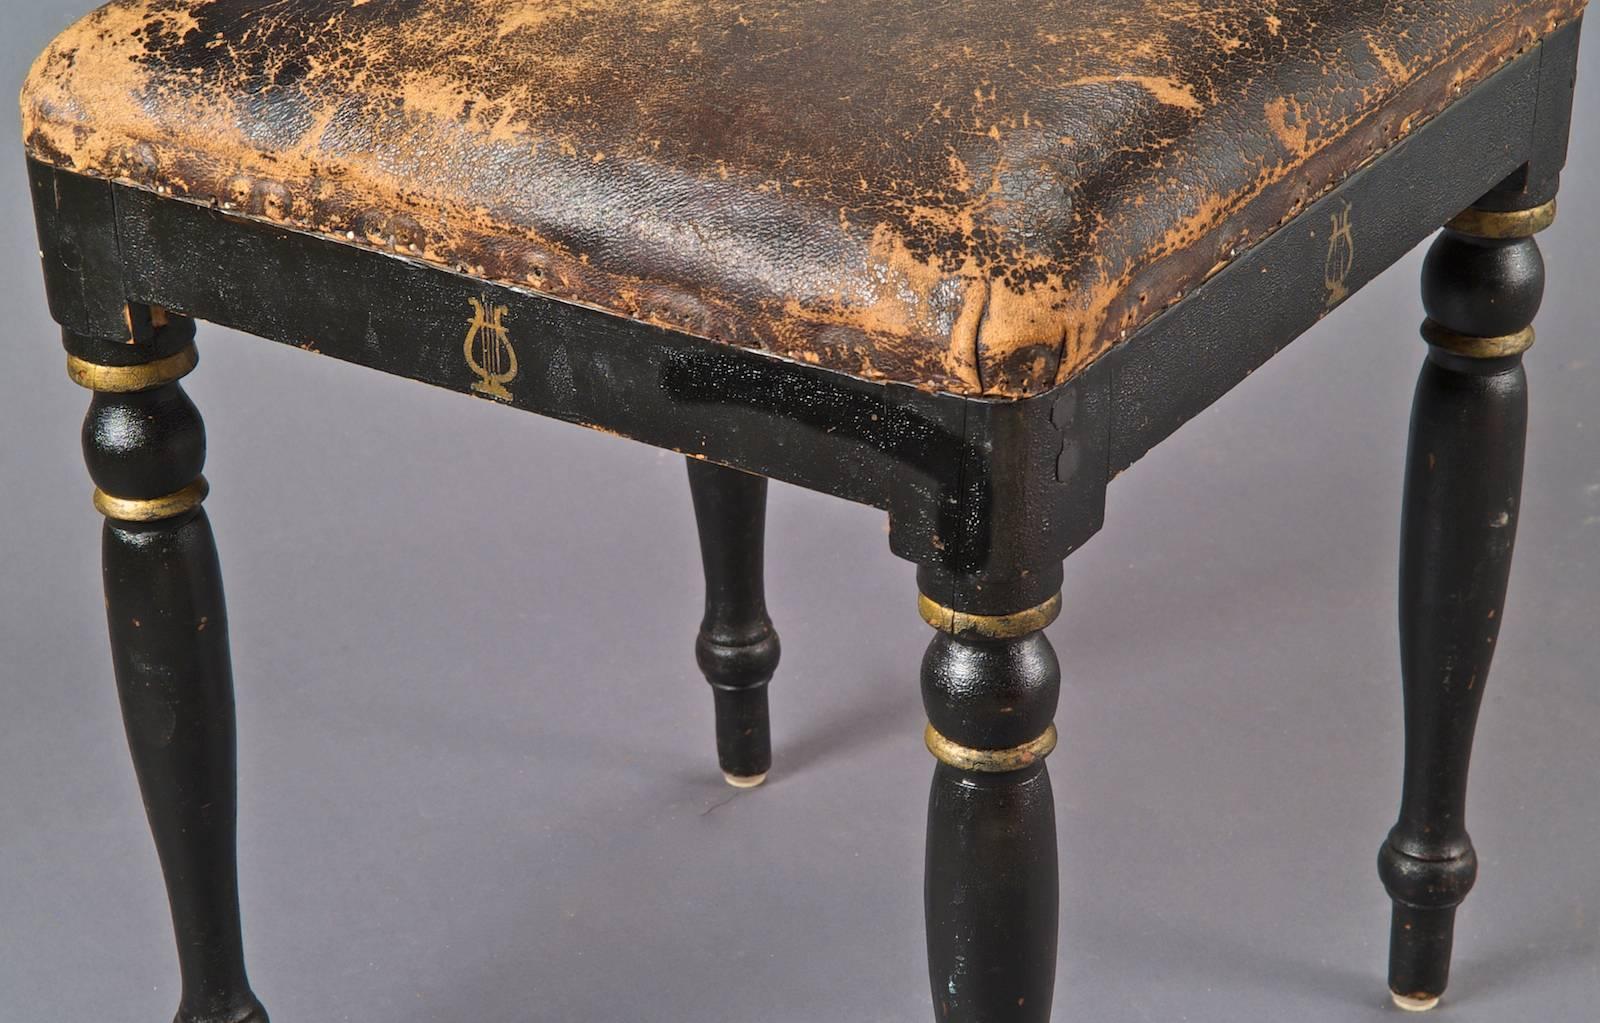 Square seating stool, covered with his original brown leather, on four plump legs in blackened wood with golden painted lyres.
Sweden, 18th century. Dimensions: 15.35 X h 17.72 in.